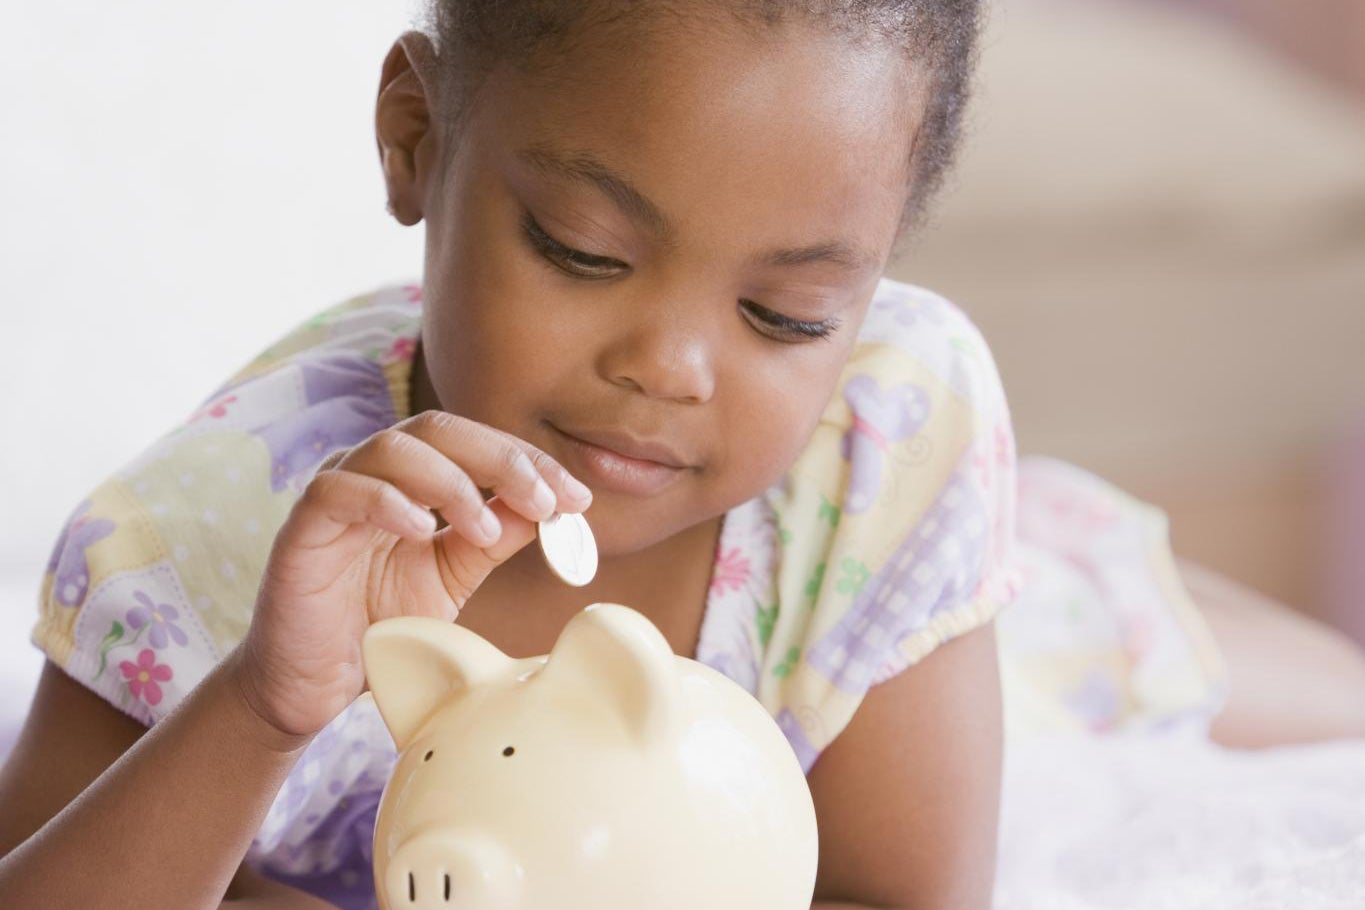 5 Ways To Have The Money Talk With Your Kids